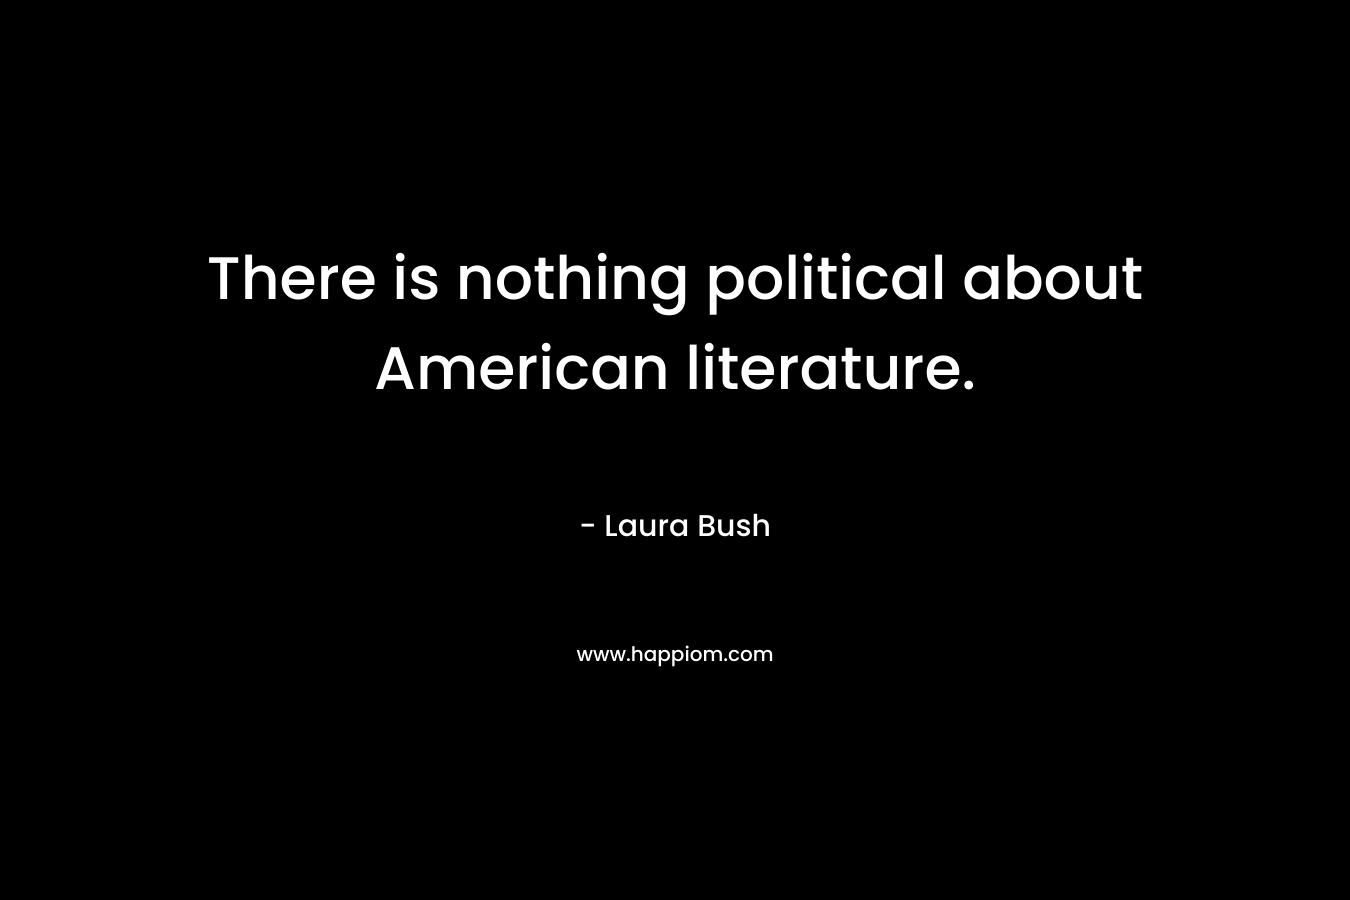 There is nothing political about American literature. – Laura Bush